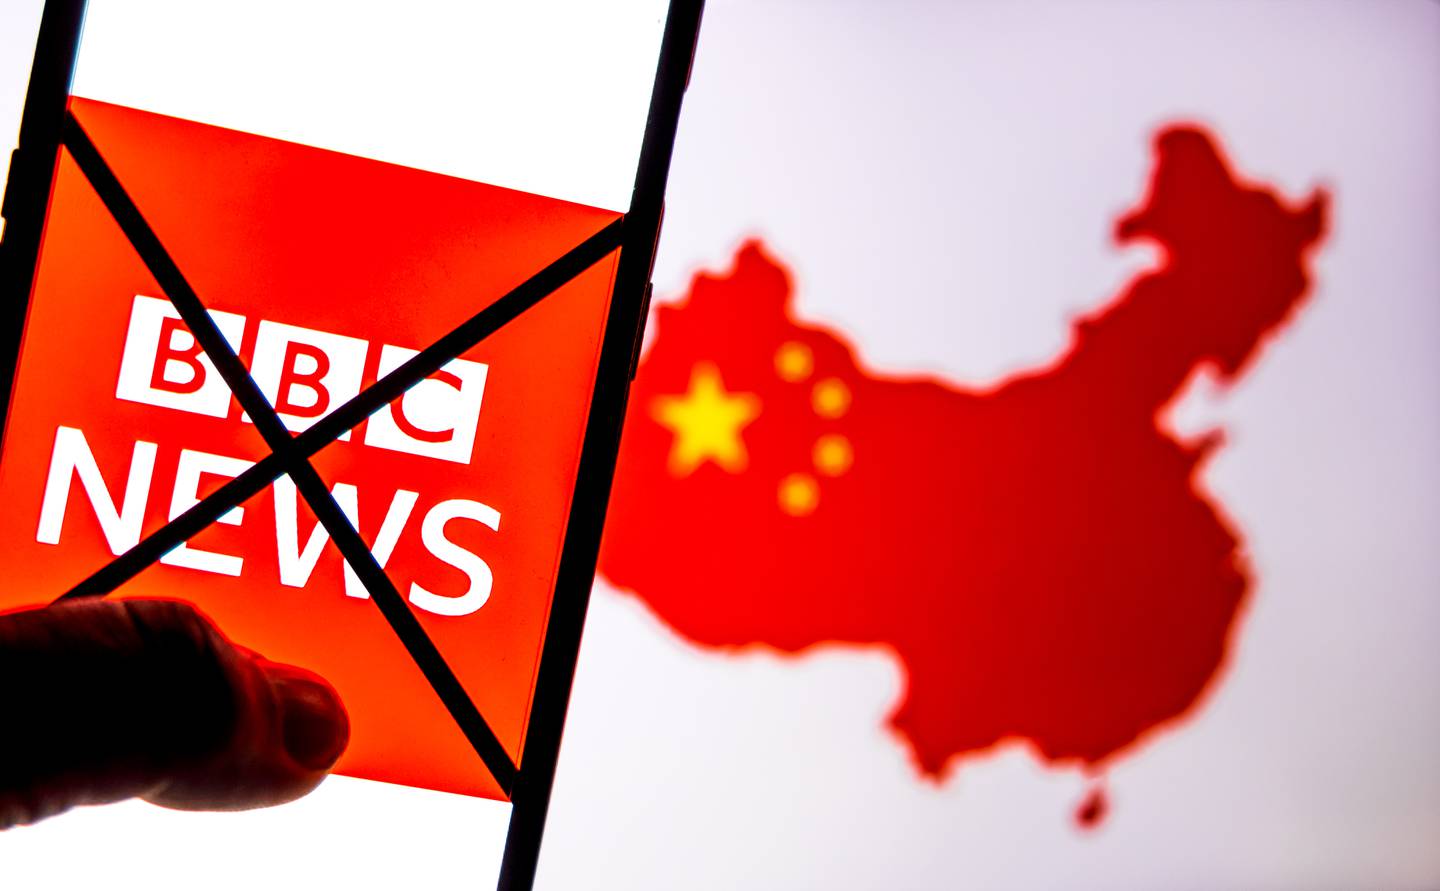 BBC banned from China. Shutterstock.